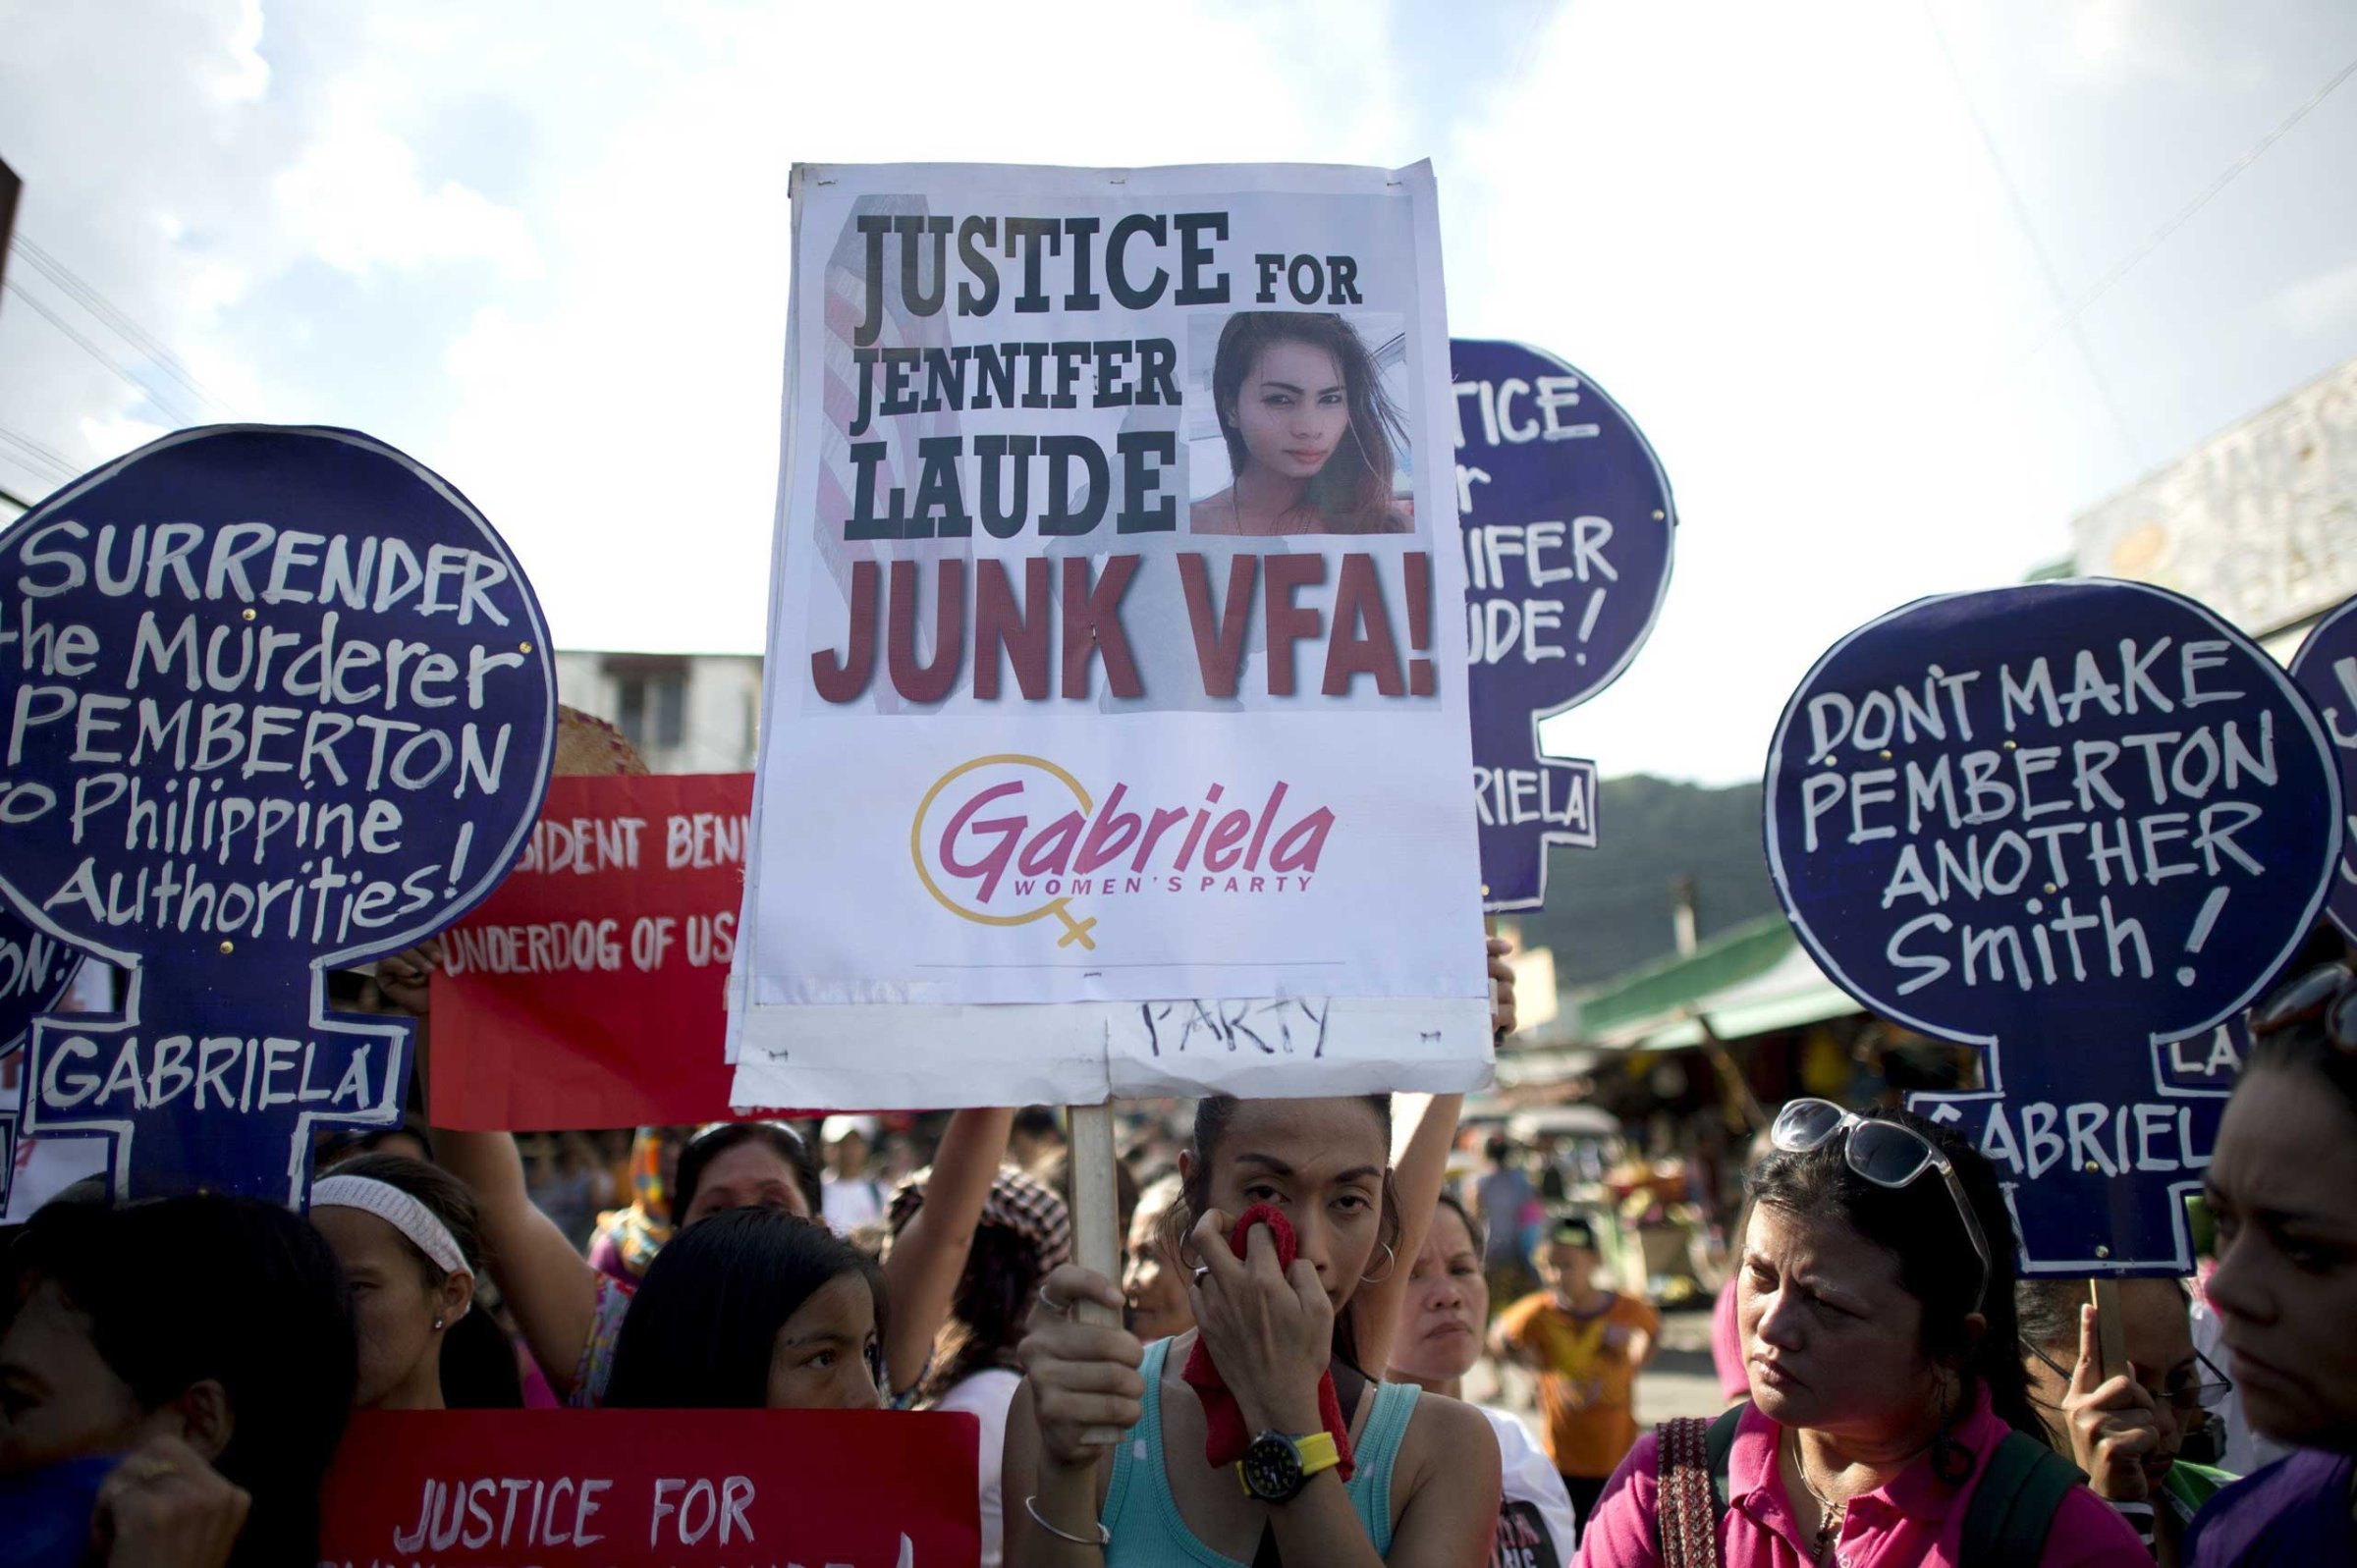 Supporters of murdered Filipino transgender Jeffrey Laude, also known as "Jennifer", hold a protest near the Hall of Justice where the preliminary hearing for the murder case is being held at the northern Philippine city of Olongapo on Oct. 10, 2014.